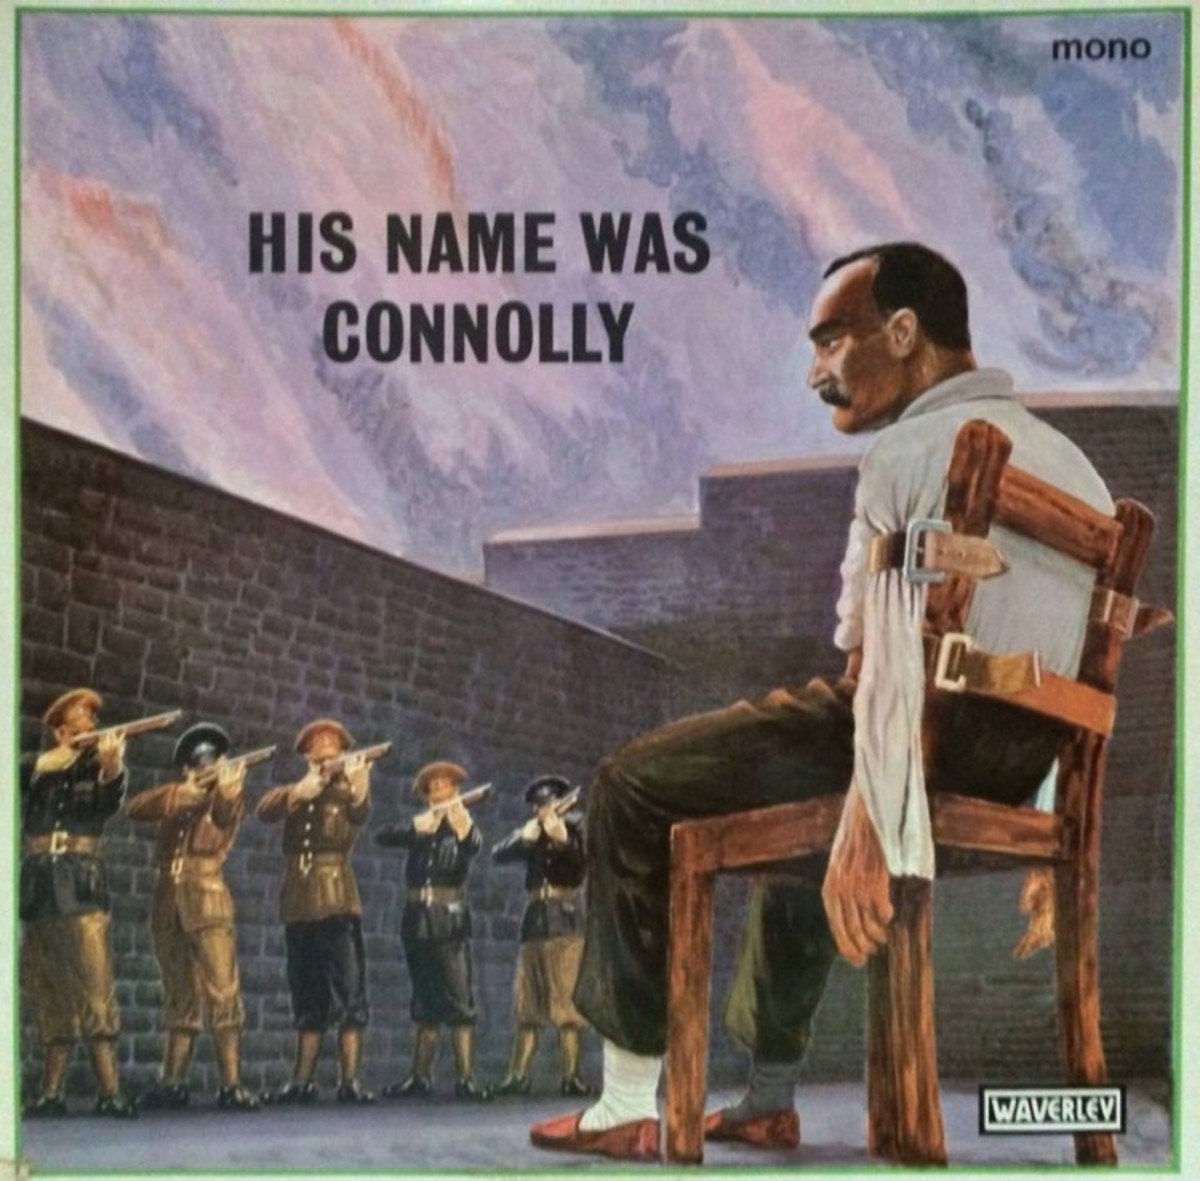 His name was Connolly.